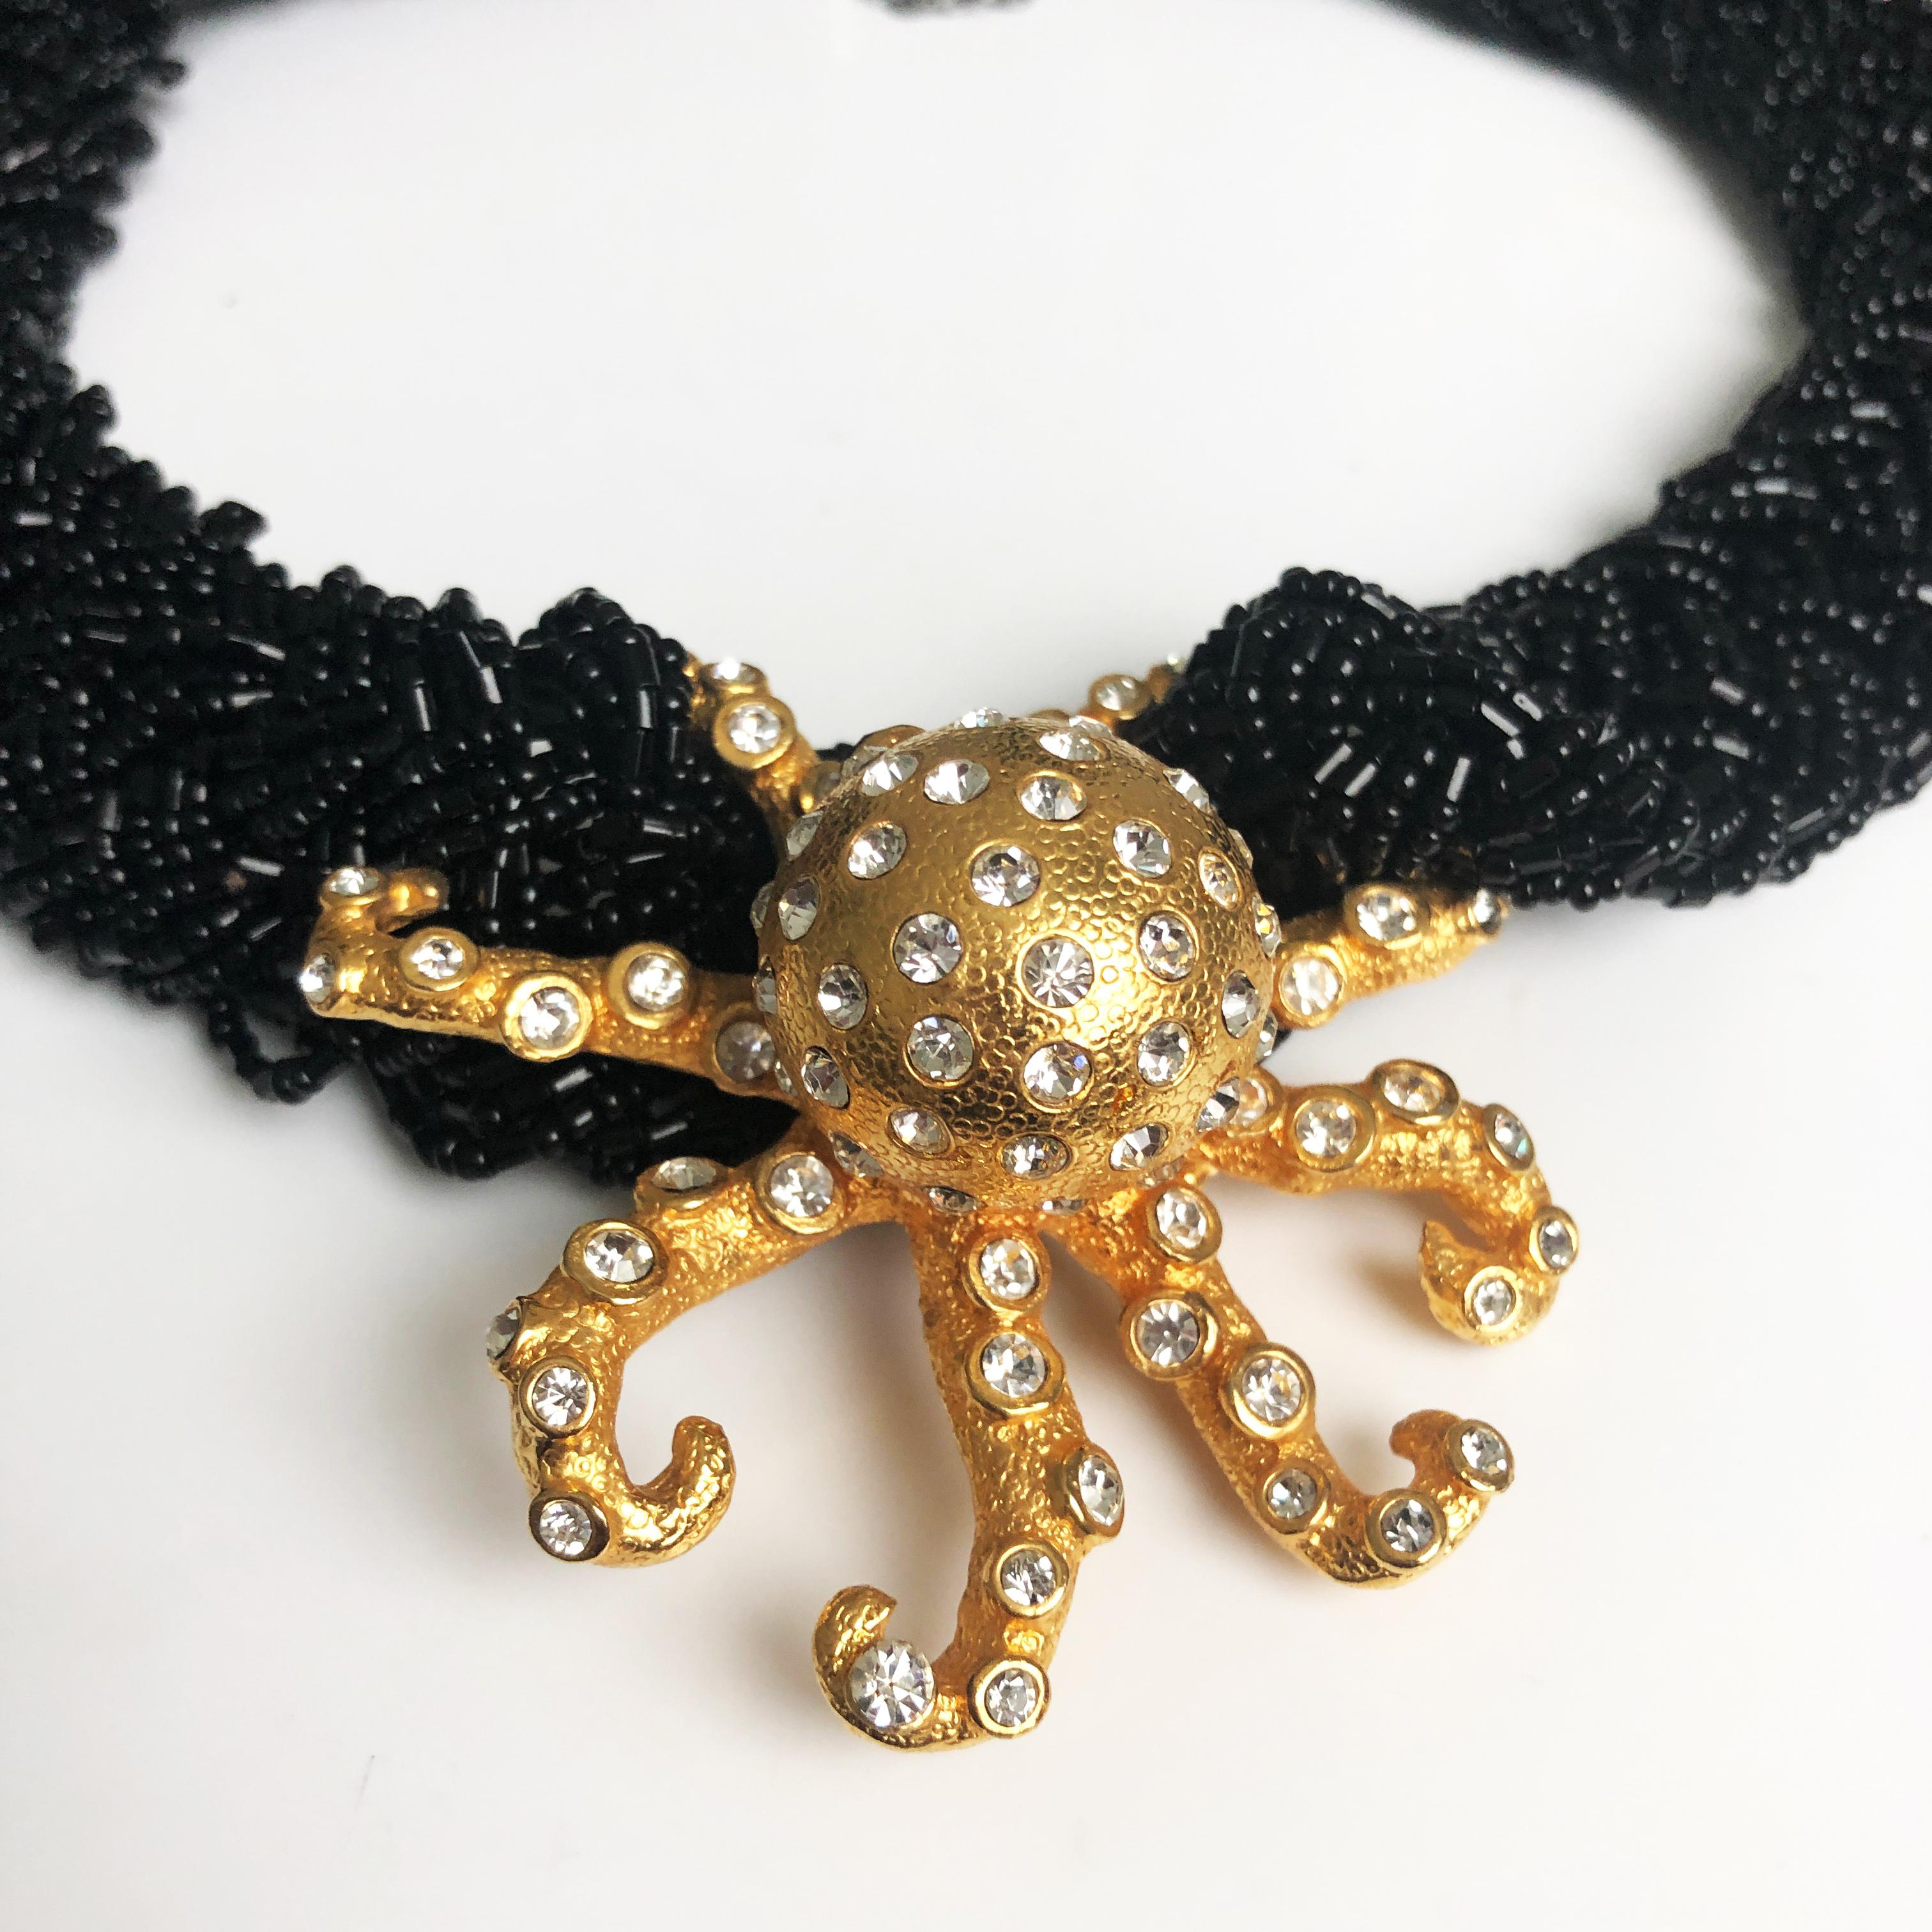 Embellished Octopus Necklace by Stephanie Lake Design Rare Statement Piece For Sale 1